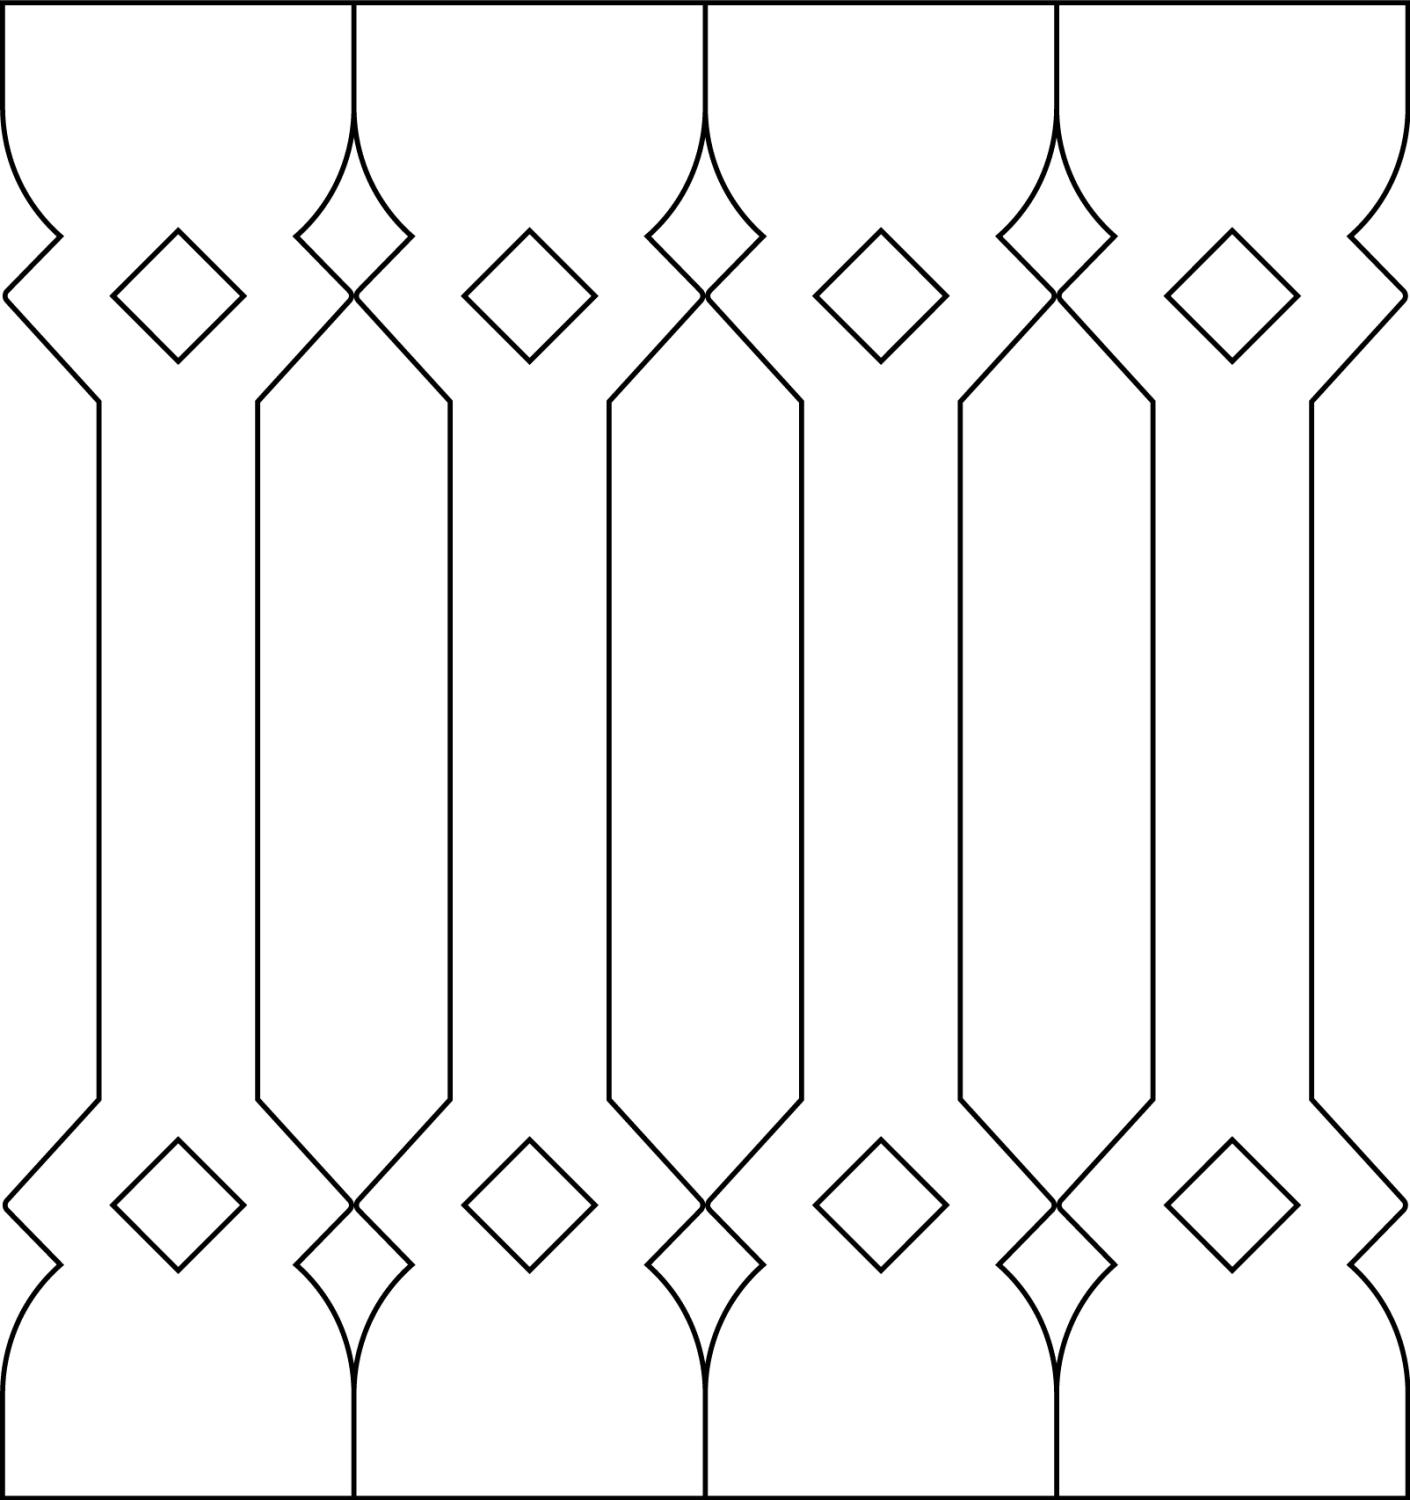 Baluster 015 - The drawing shows 4 Decorative victorian sawn balusters & pickets together